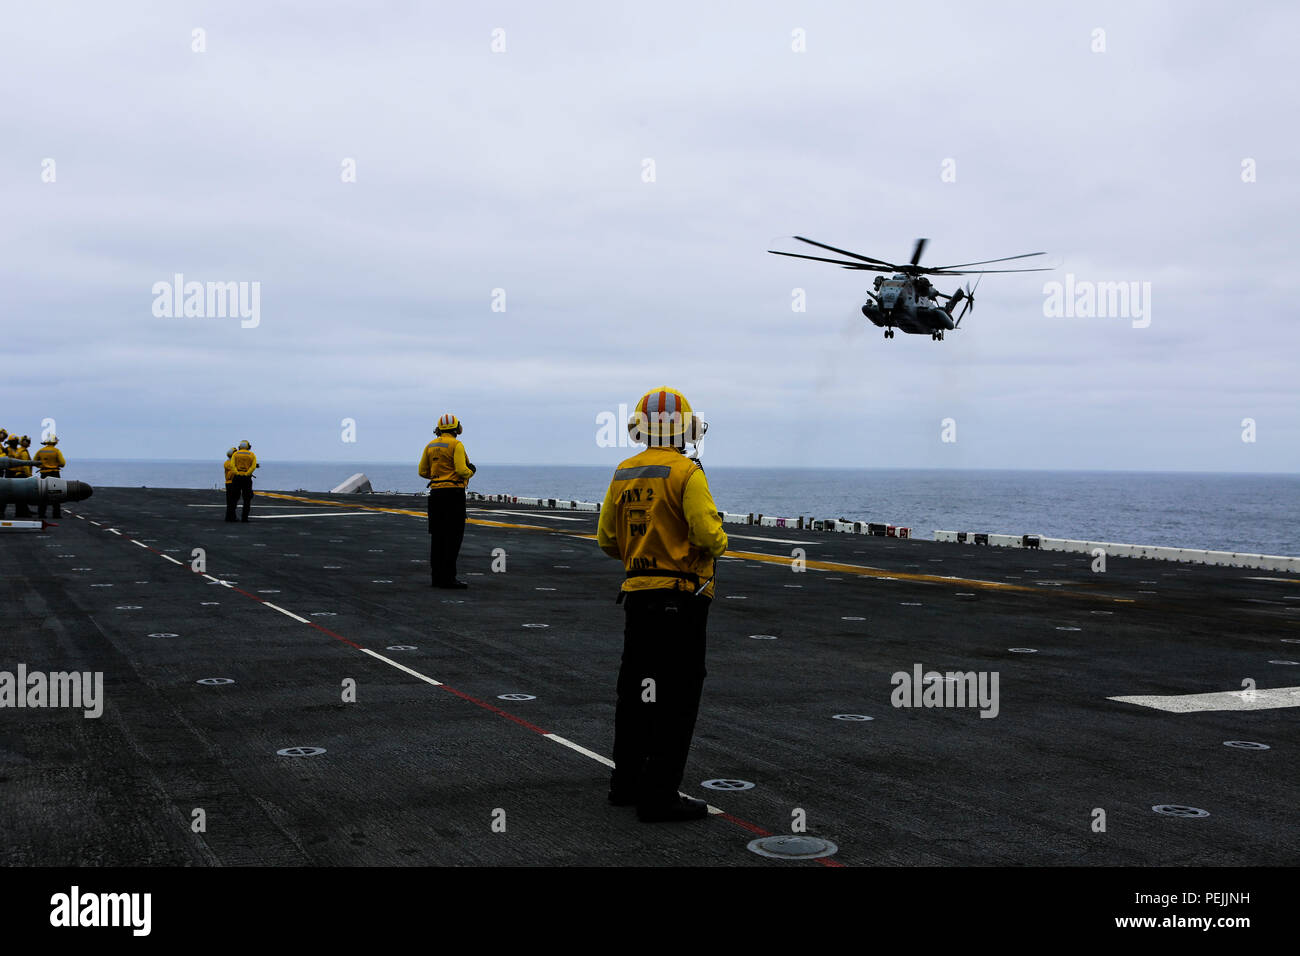 A U.S. Navy landing enlisted signalmen observes a CH-53E Super Stallion aboard the amphibious assault USS Boxer during Exercise Dawn Blitz 2015, Aug. 31, 2015. Dawn Blitz is a multinational amphibious training exercise designed to train Expeditionary Strike Group Three, 1st Marine Expeditionary Brigade and Coalition partners in the operations expected of an amphibious task force while also building U.S. and Coalition operational interoperability from the sea. (U.S. Marine Corps photo by Lance Cpl. April L. Price/Released) Stock Photo